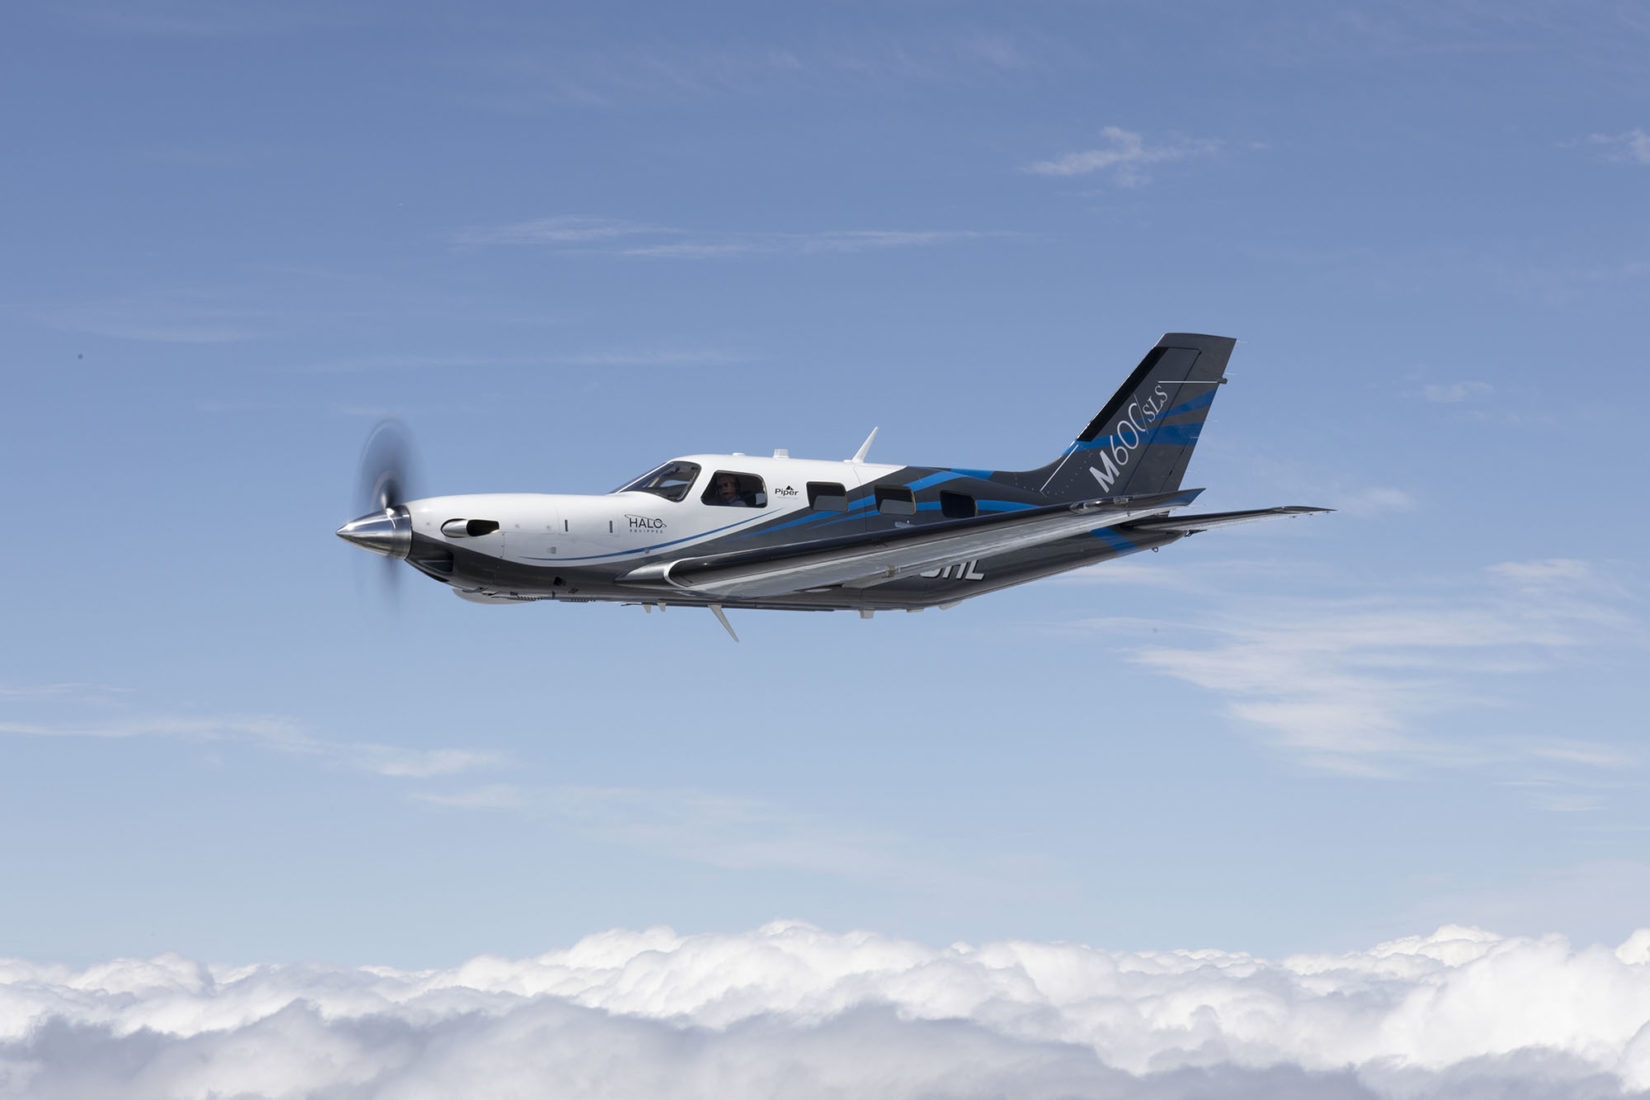 Piper M600/SLS aircraft flying over the clouds